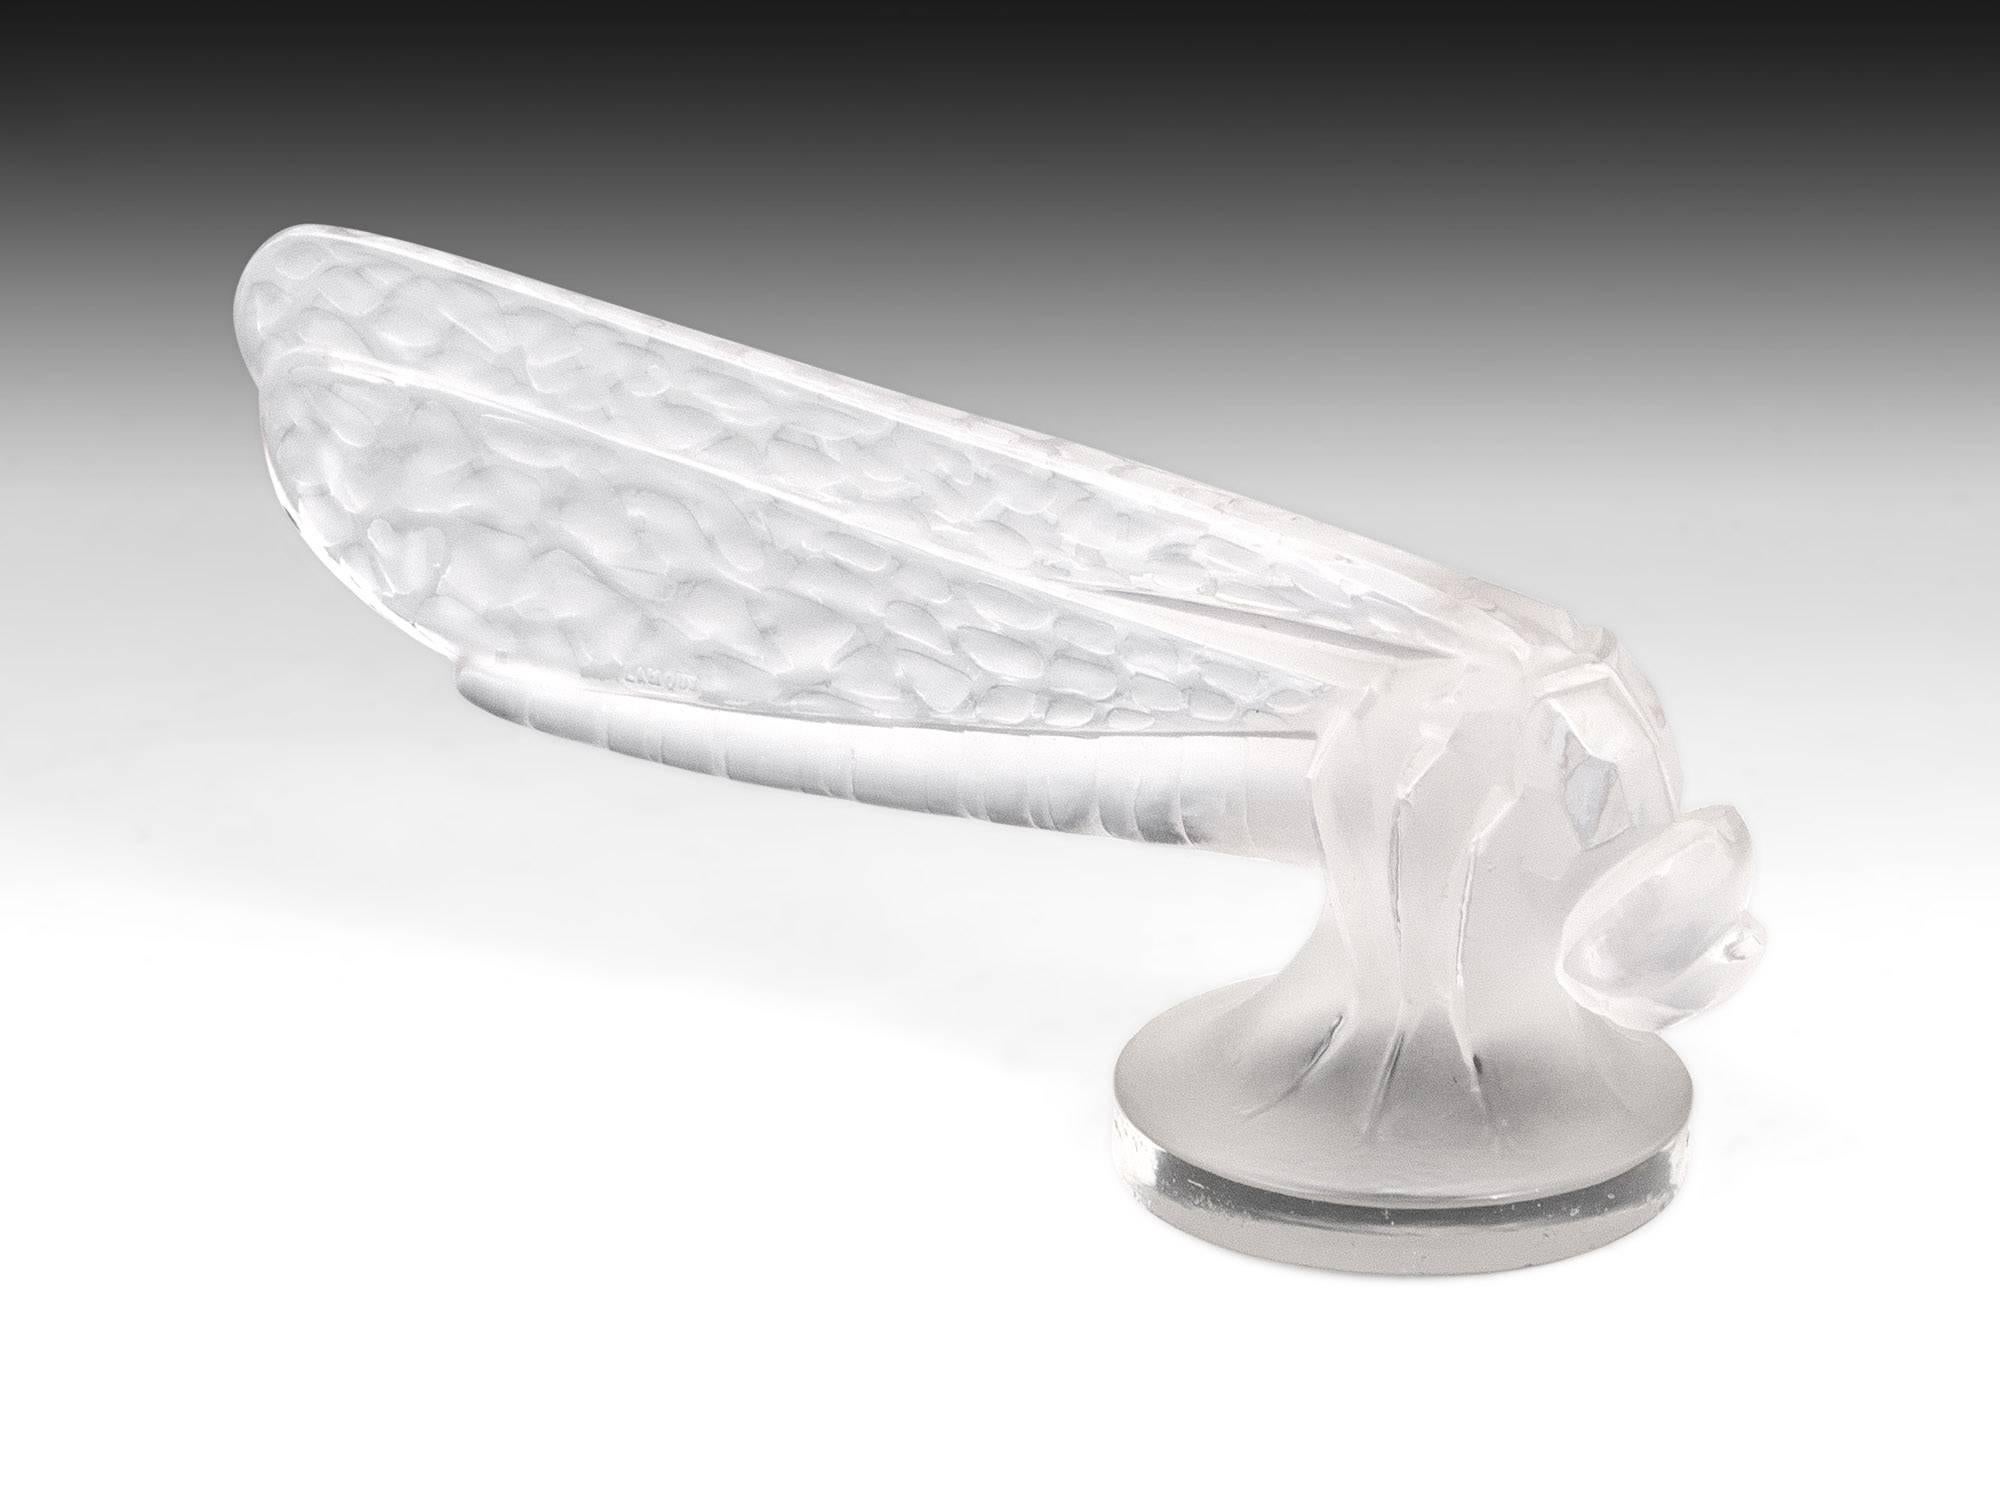 Lalique Petite Libellule / small dragonfly car mascot. Model number: 1144 

These wonderful glass Lalique car mascots were originally made as car hood ornaments in the 1920s by famous glass make René Jules Lalique, who started a company using his